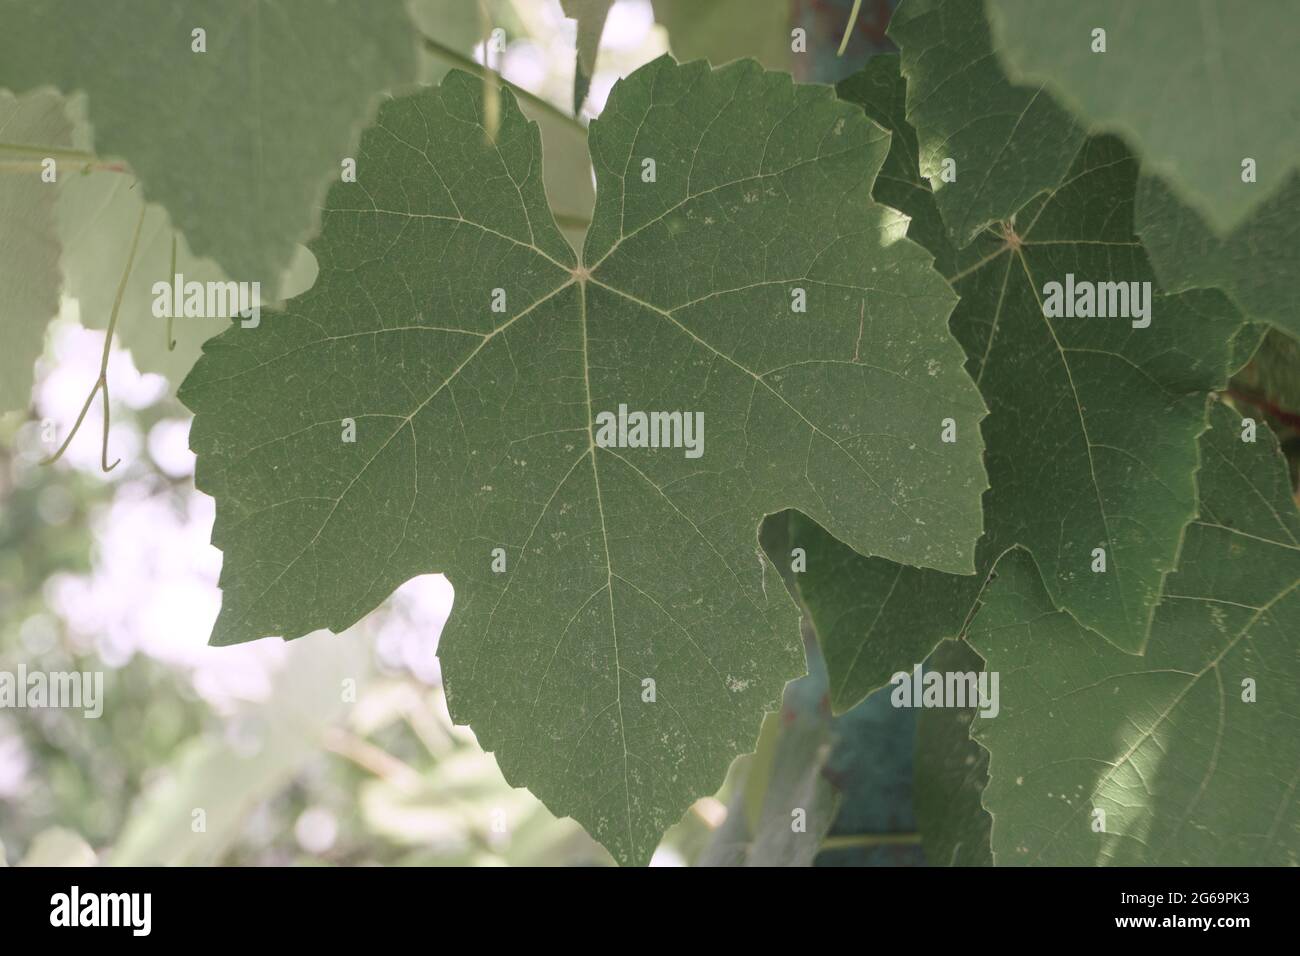 Beautifu grape leaf  pattern background texture for design. Macro photography view. Stock Photo